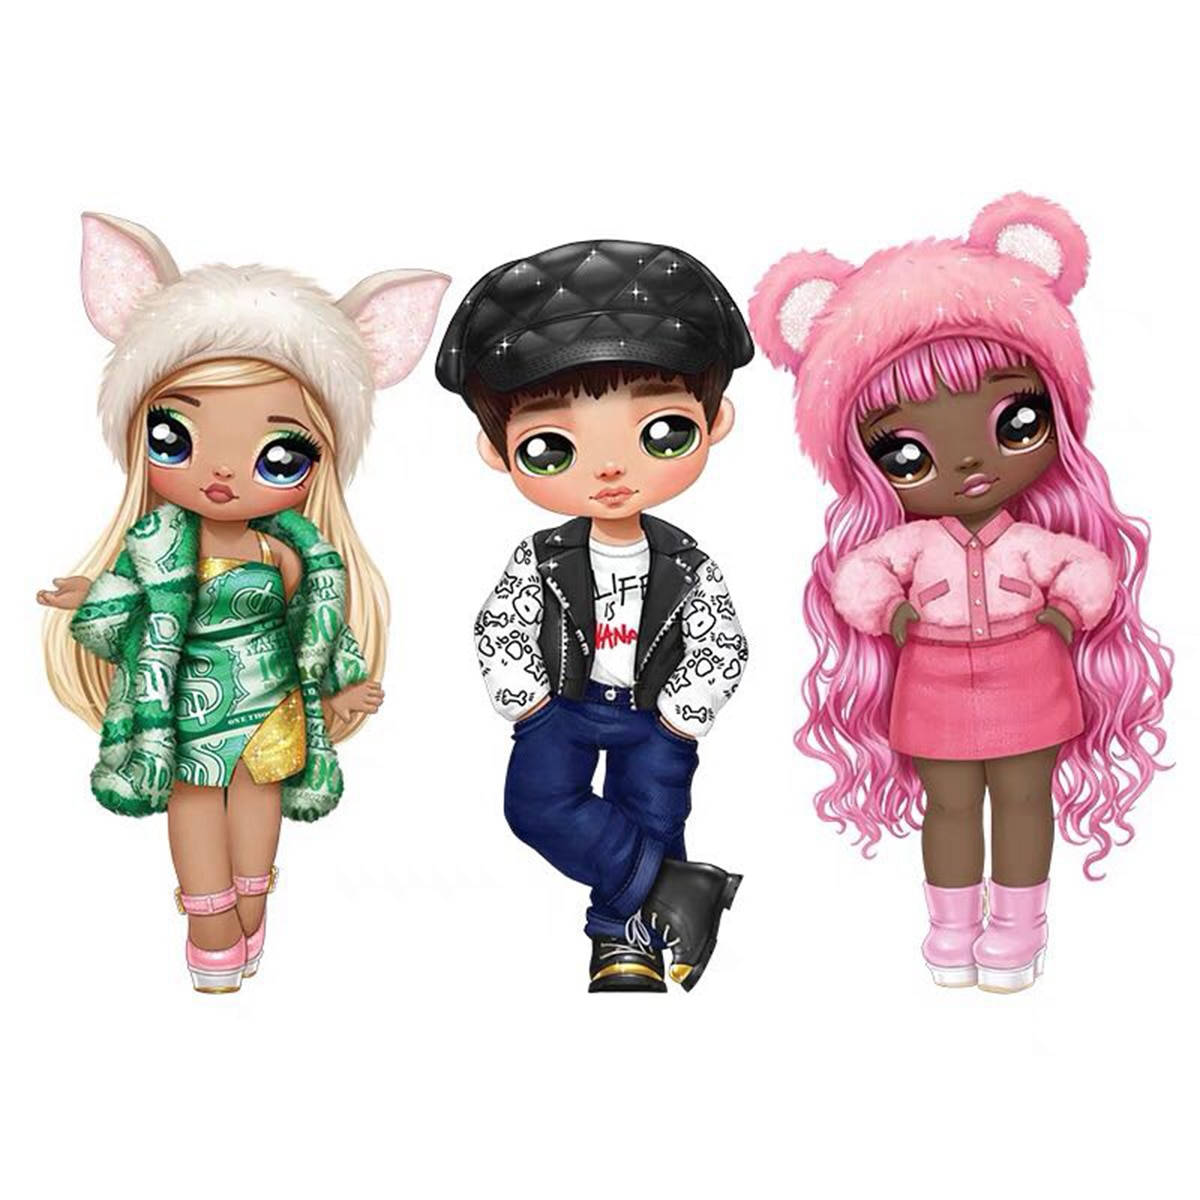 Three Cartoon Dolls With Different Outfits Wallpaper